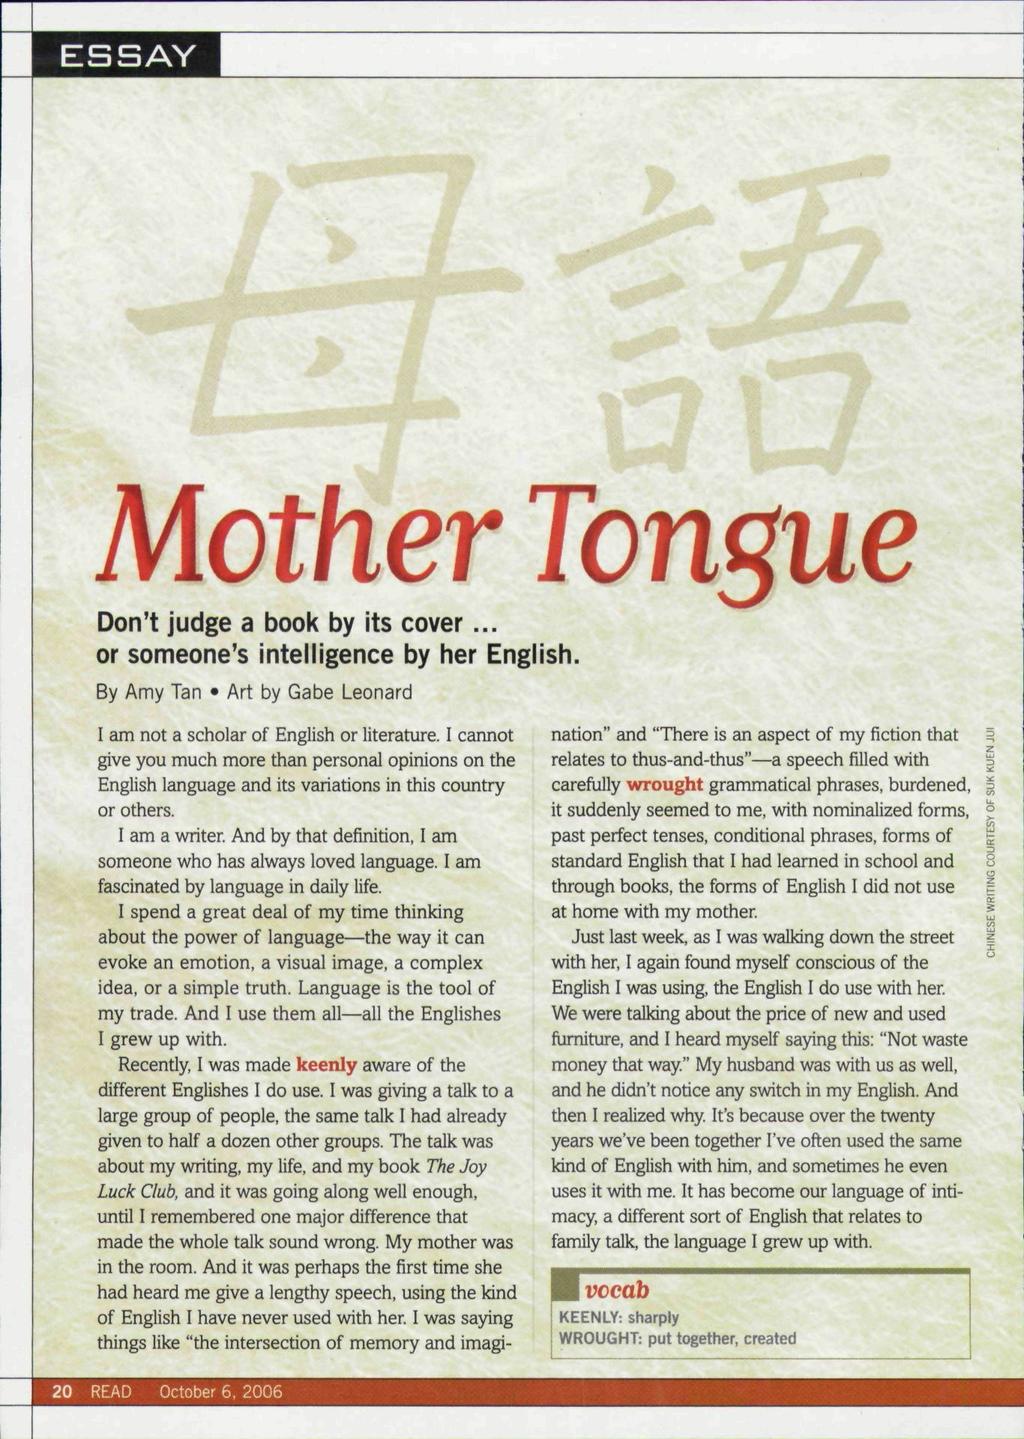 ESSAY Mother Tongue Don't judge a book by its cover or someone's intelligence by her English. By Amy Tan Art by Gabe Leonard I am not a scholar of English or literature.